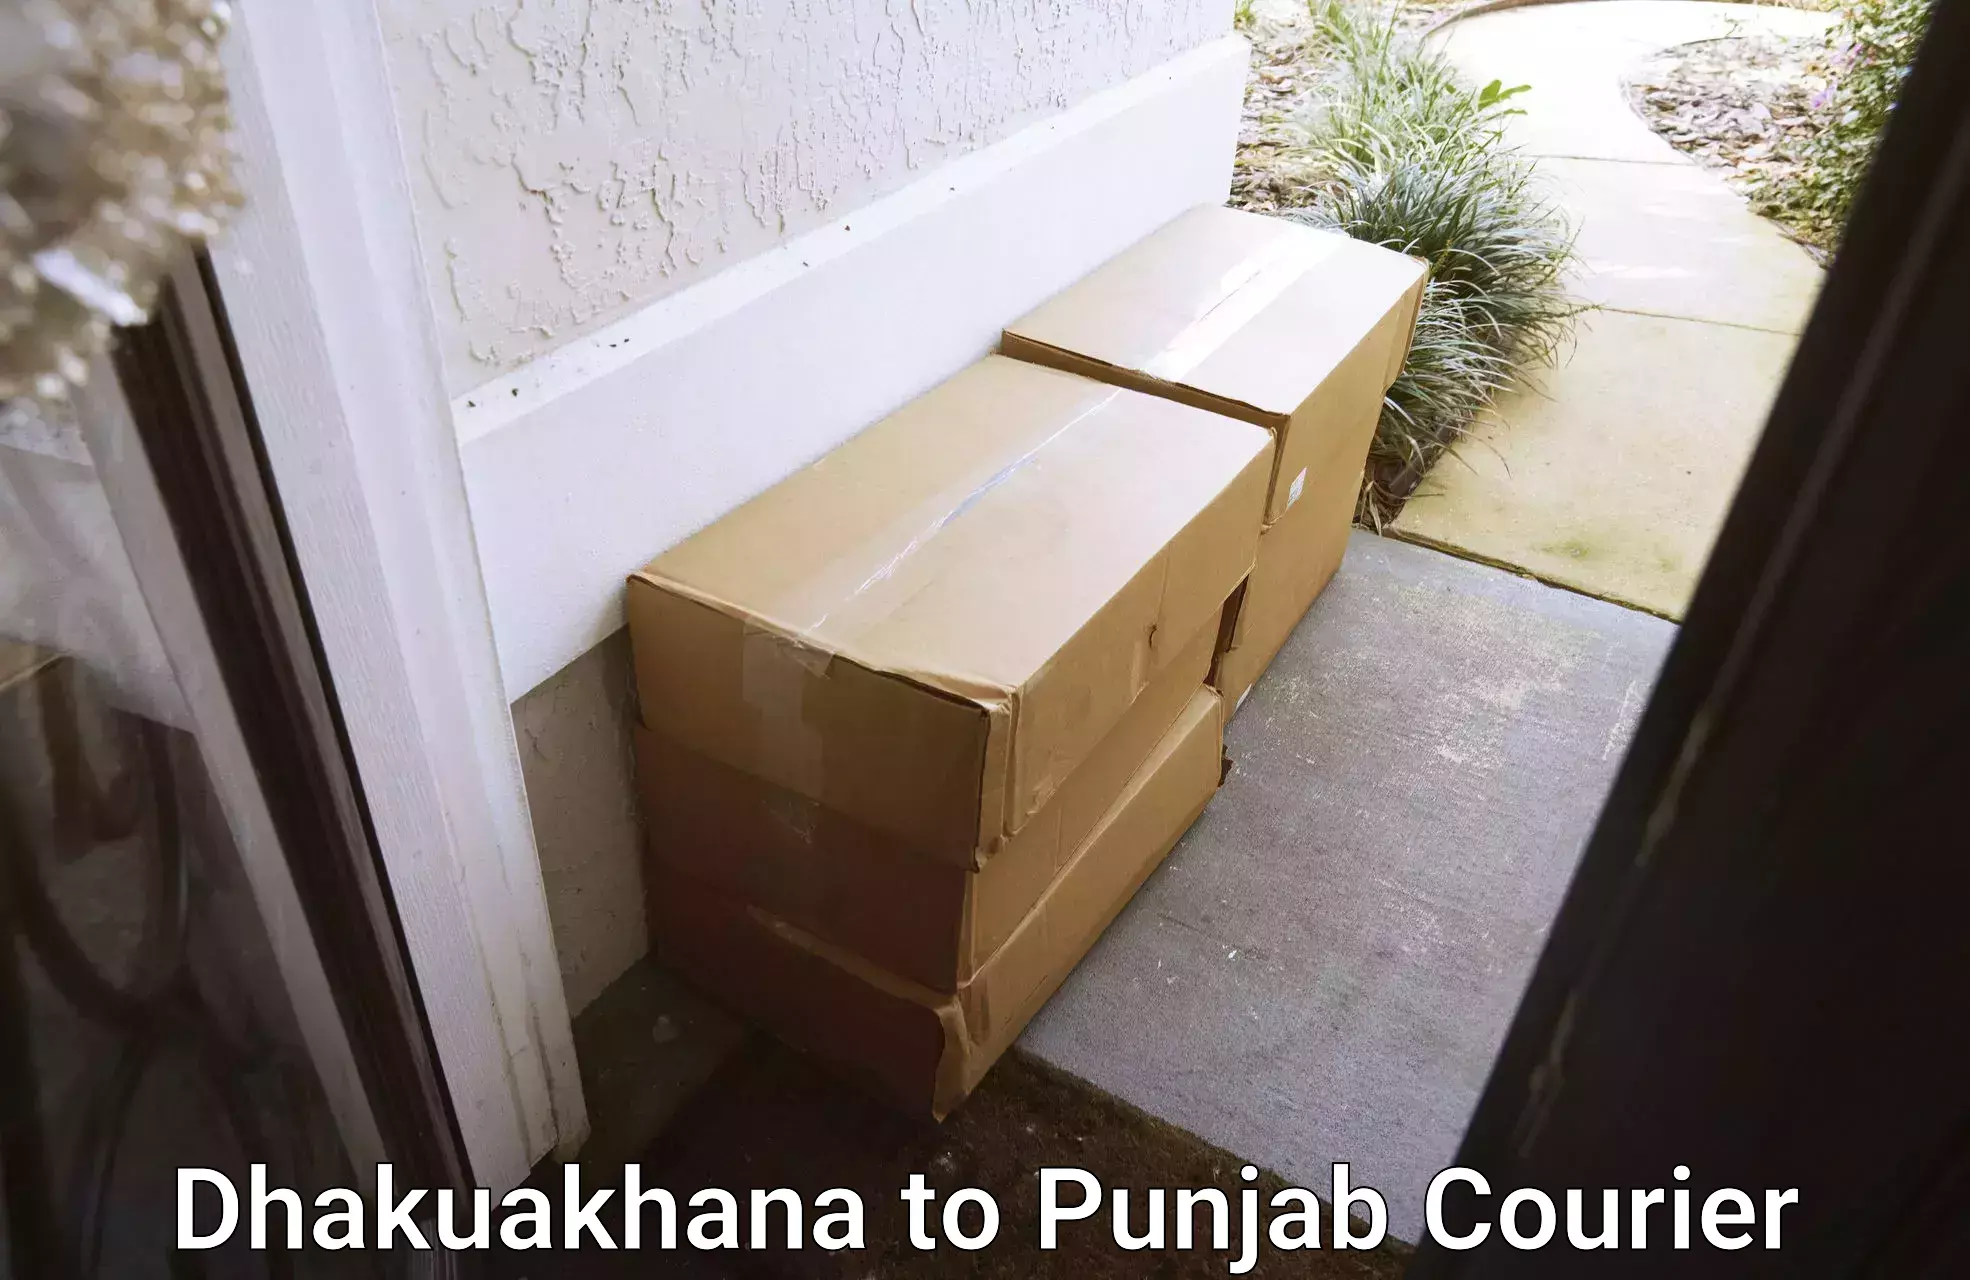 Personal parcel delivery Dhakuakhana to Punjab